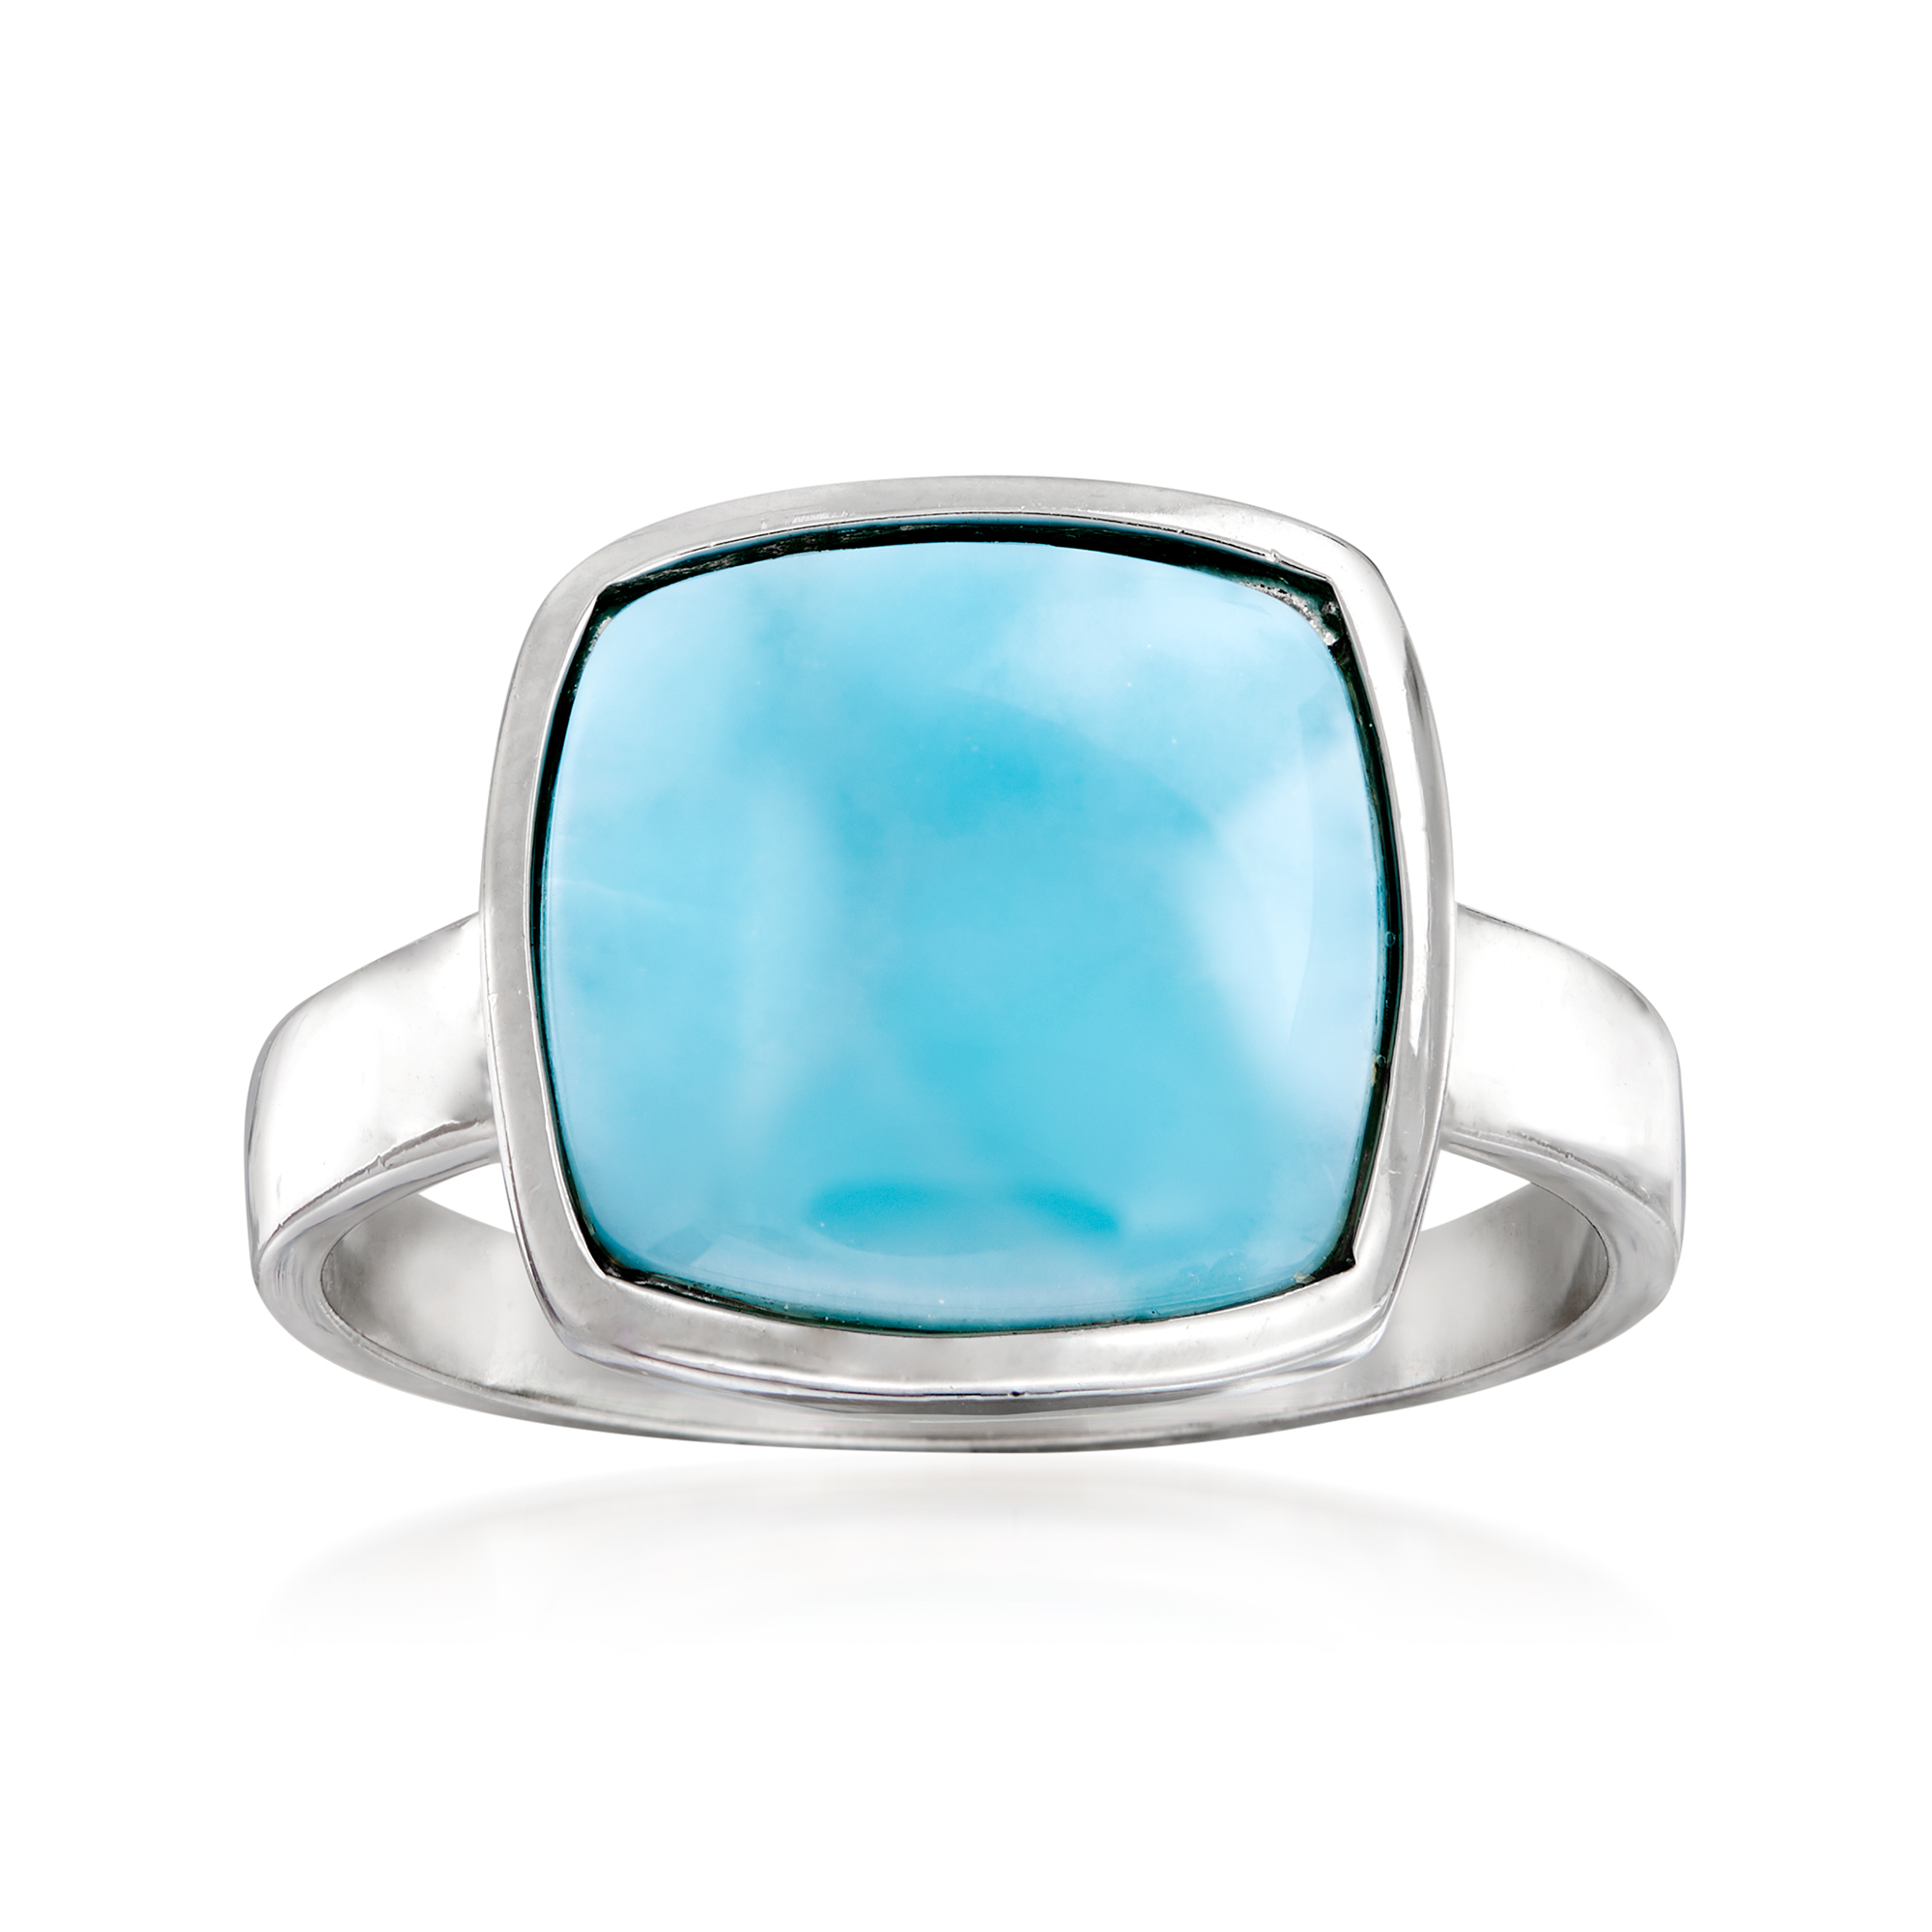 WHOLESALE 5PC 925 SOLID STERLING SILVER BLUE LARIMAR RING LOT O o990